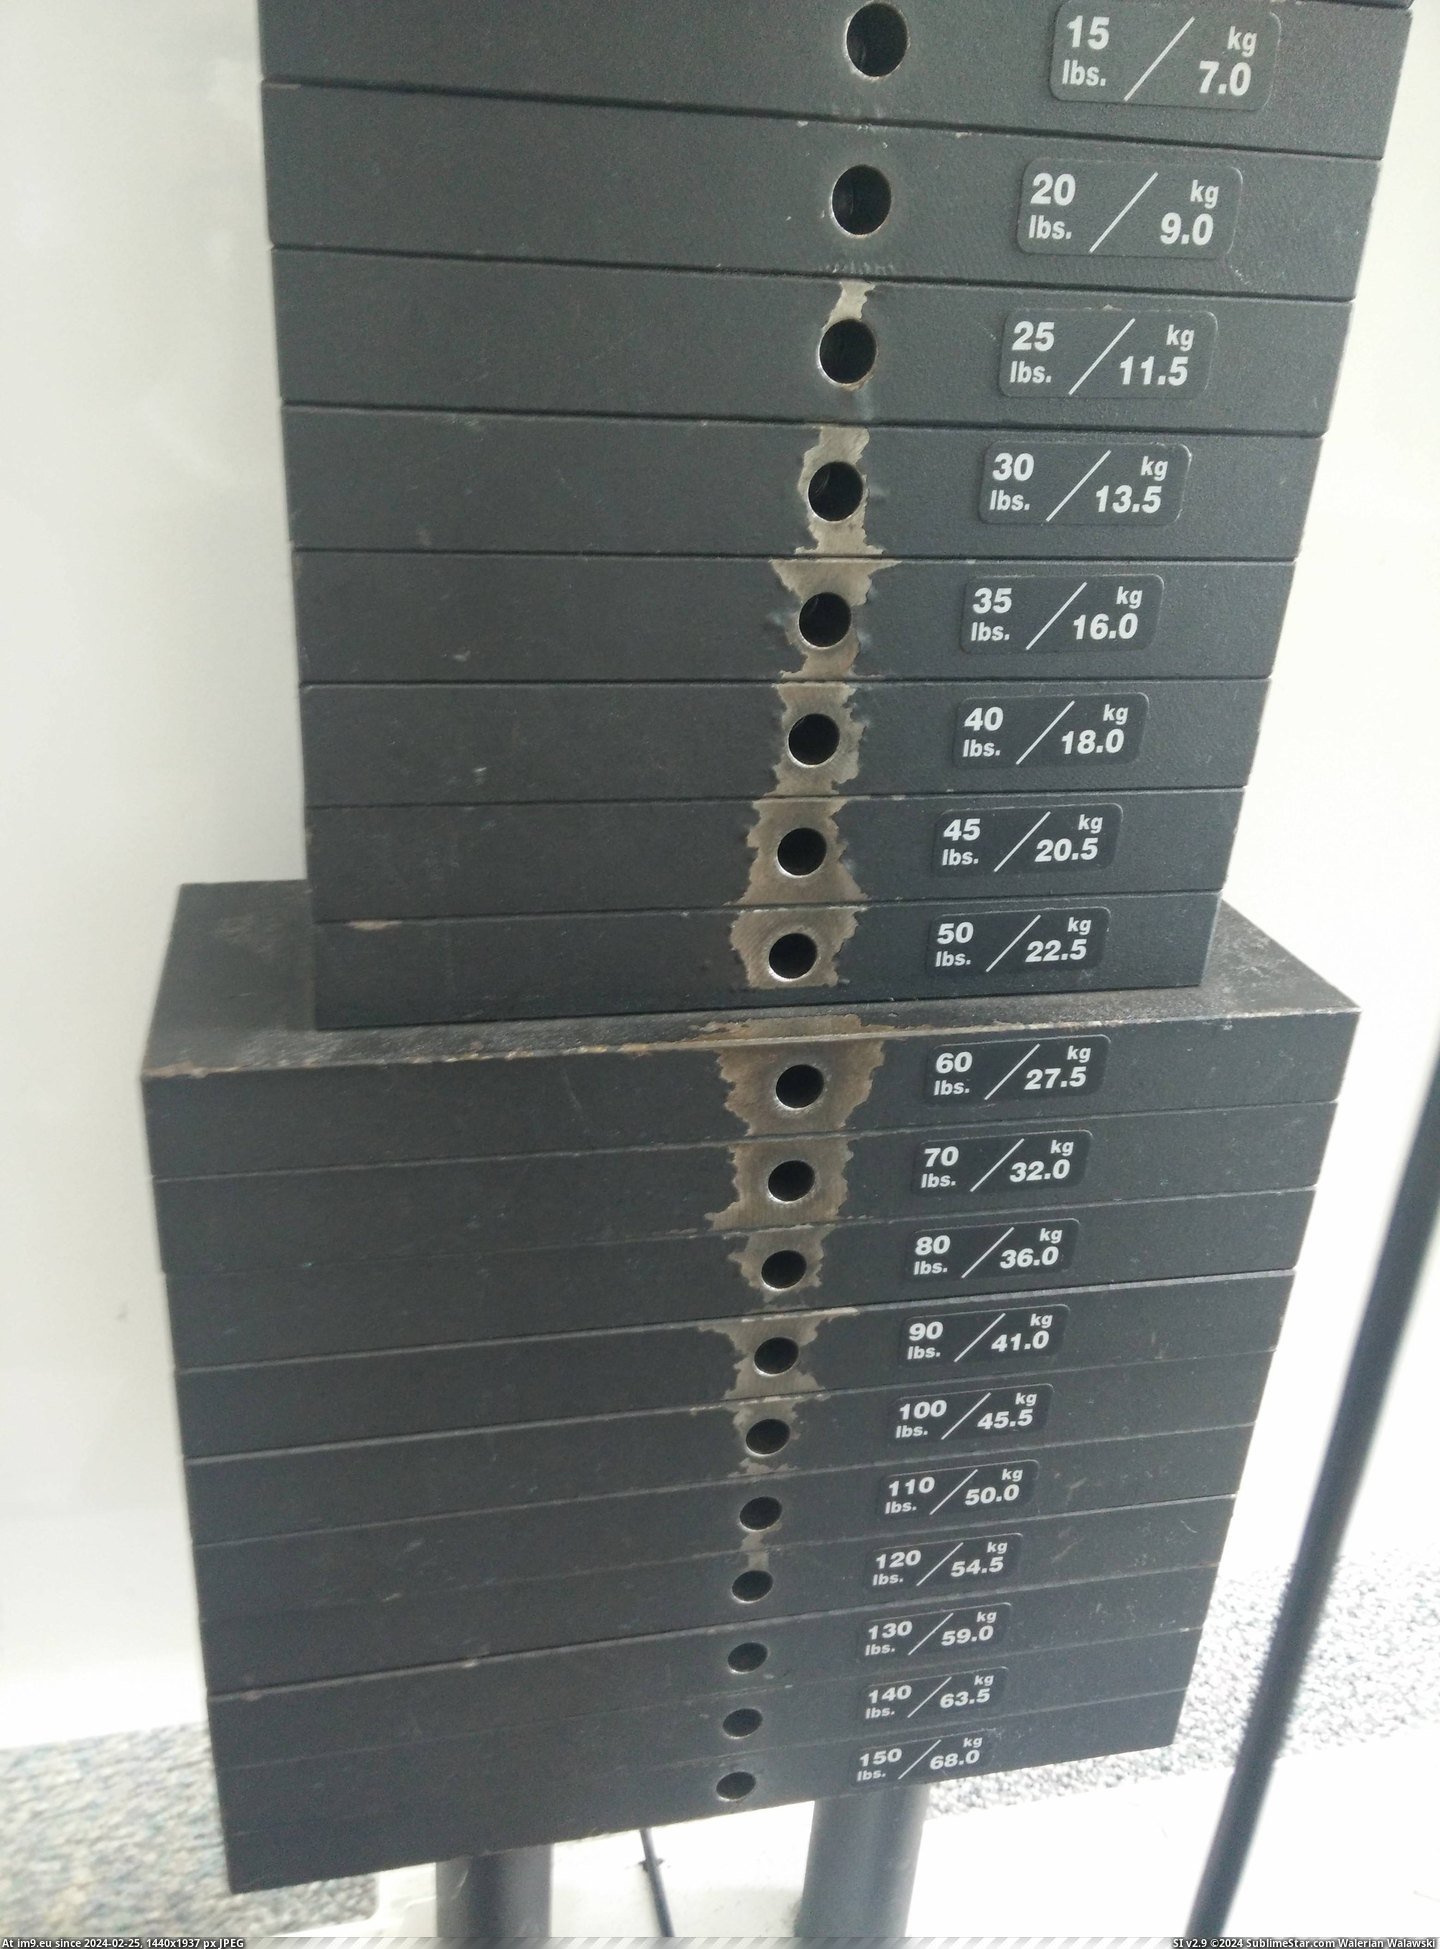 [Mildlyinteresting] The missing paint on these weights shows a bell-curve distribution of the amount that people select. (in My r/MILDLYINTERESTING favs)